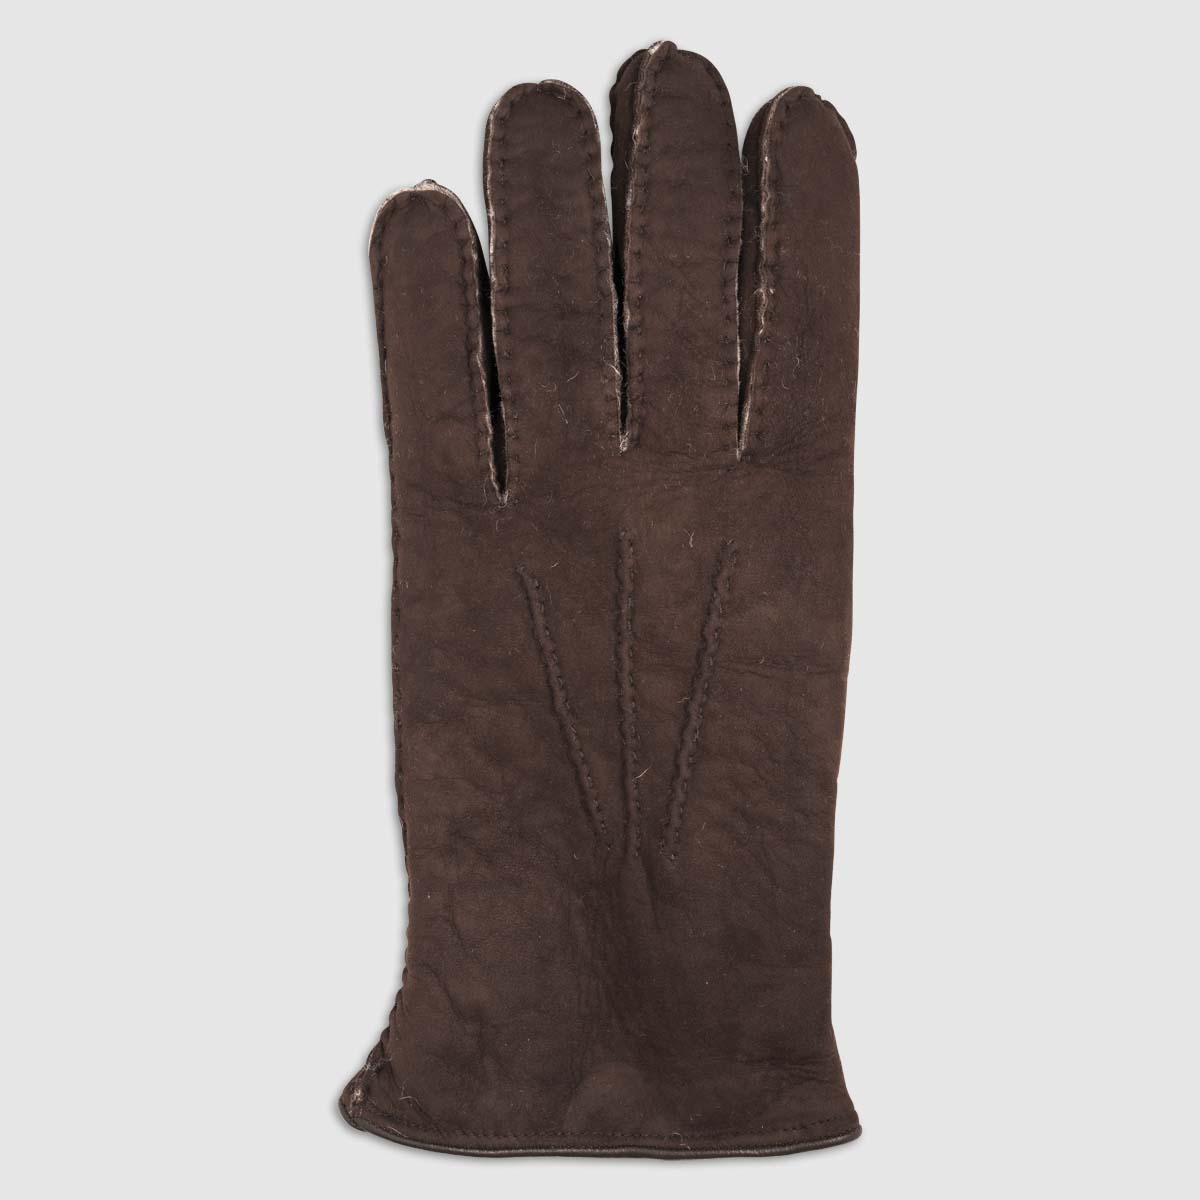 Leather Glove with Shearling Lining in Brown – 8.5